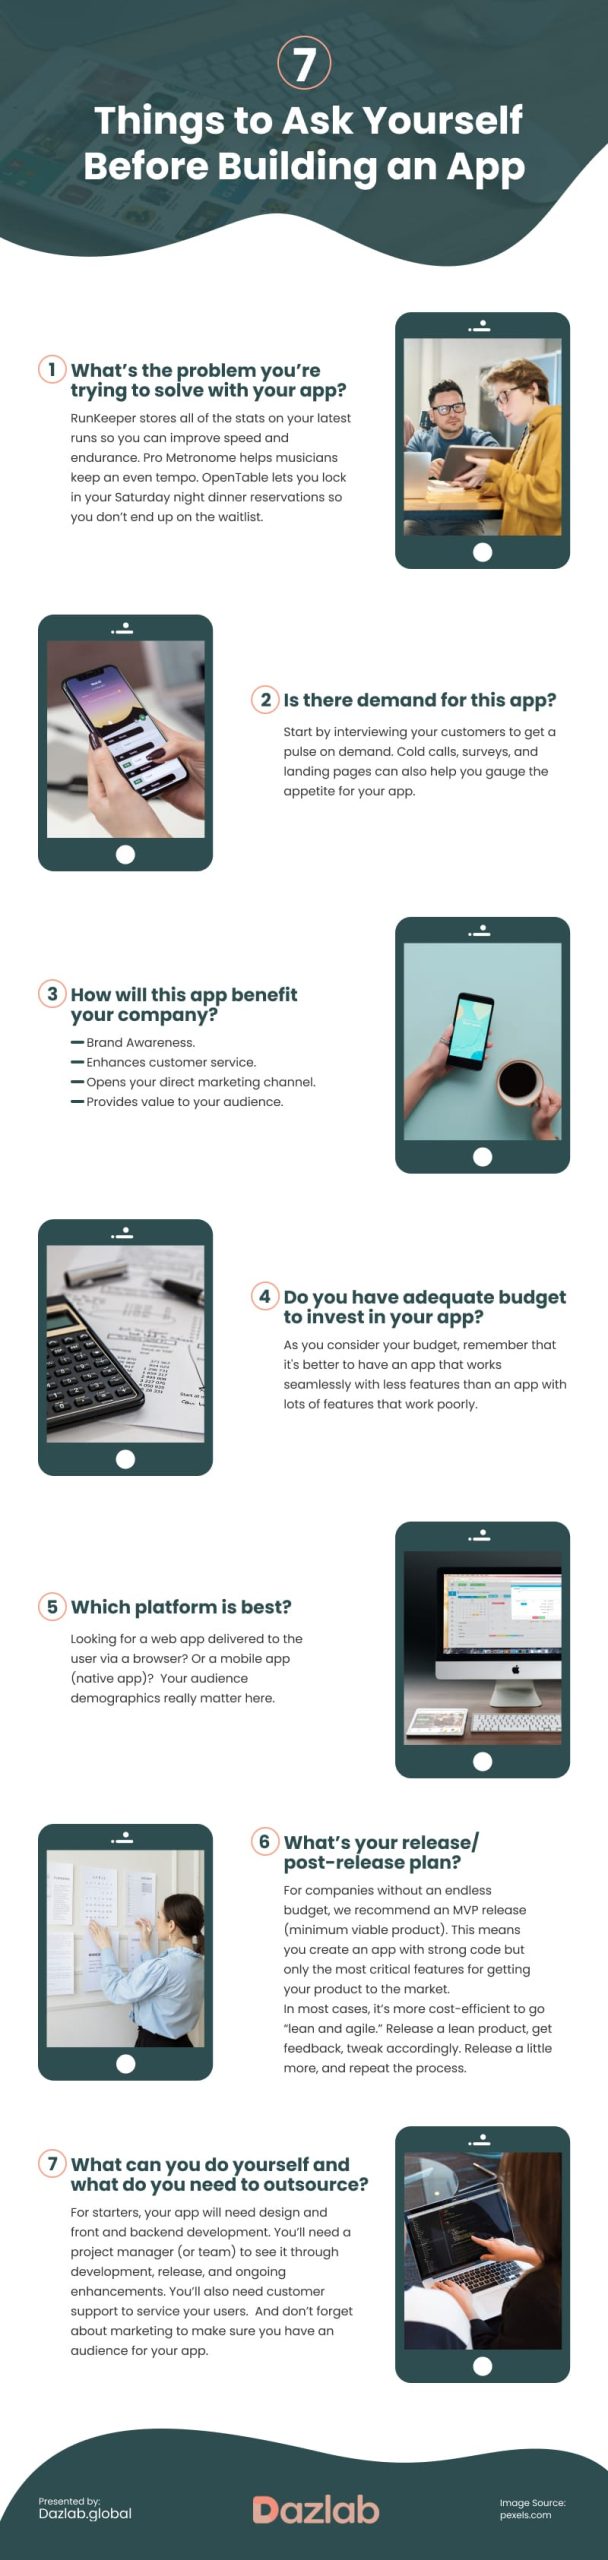 7 Things to Ask Yourself Before Building an App Infographic